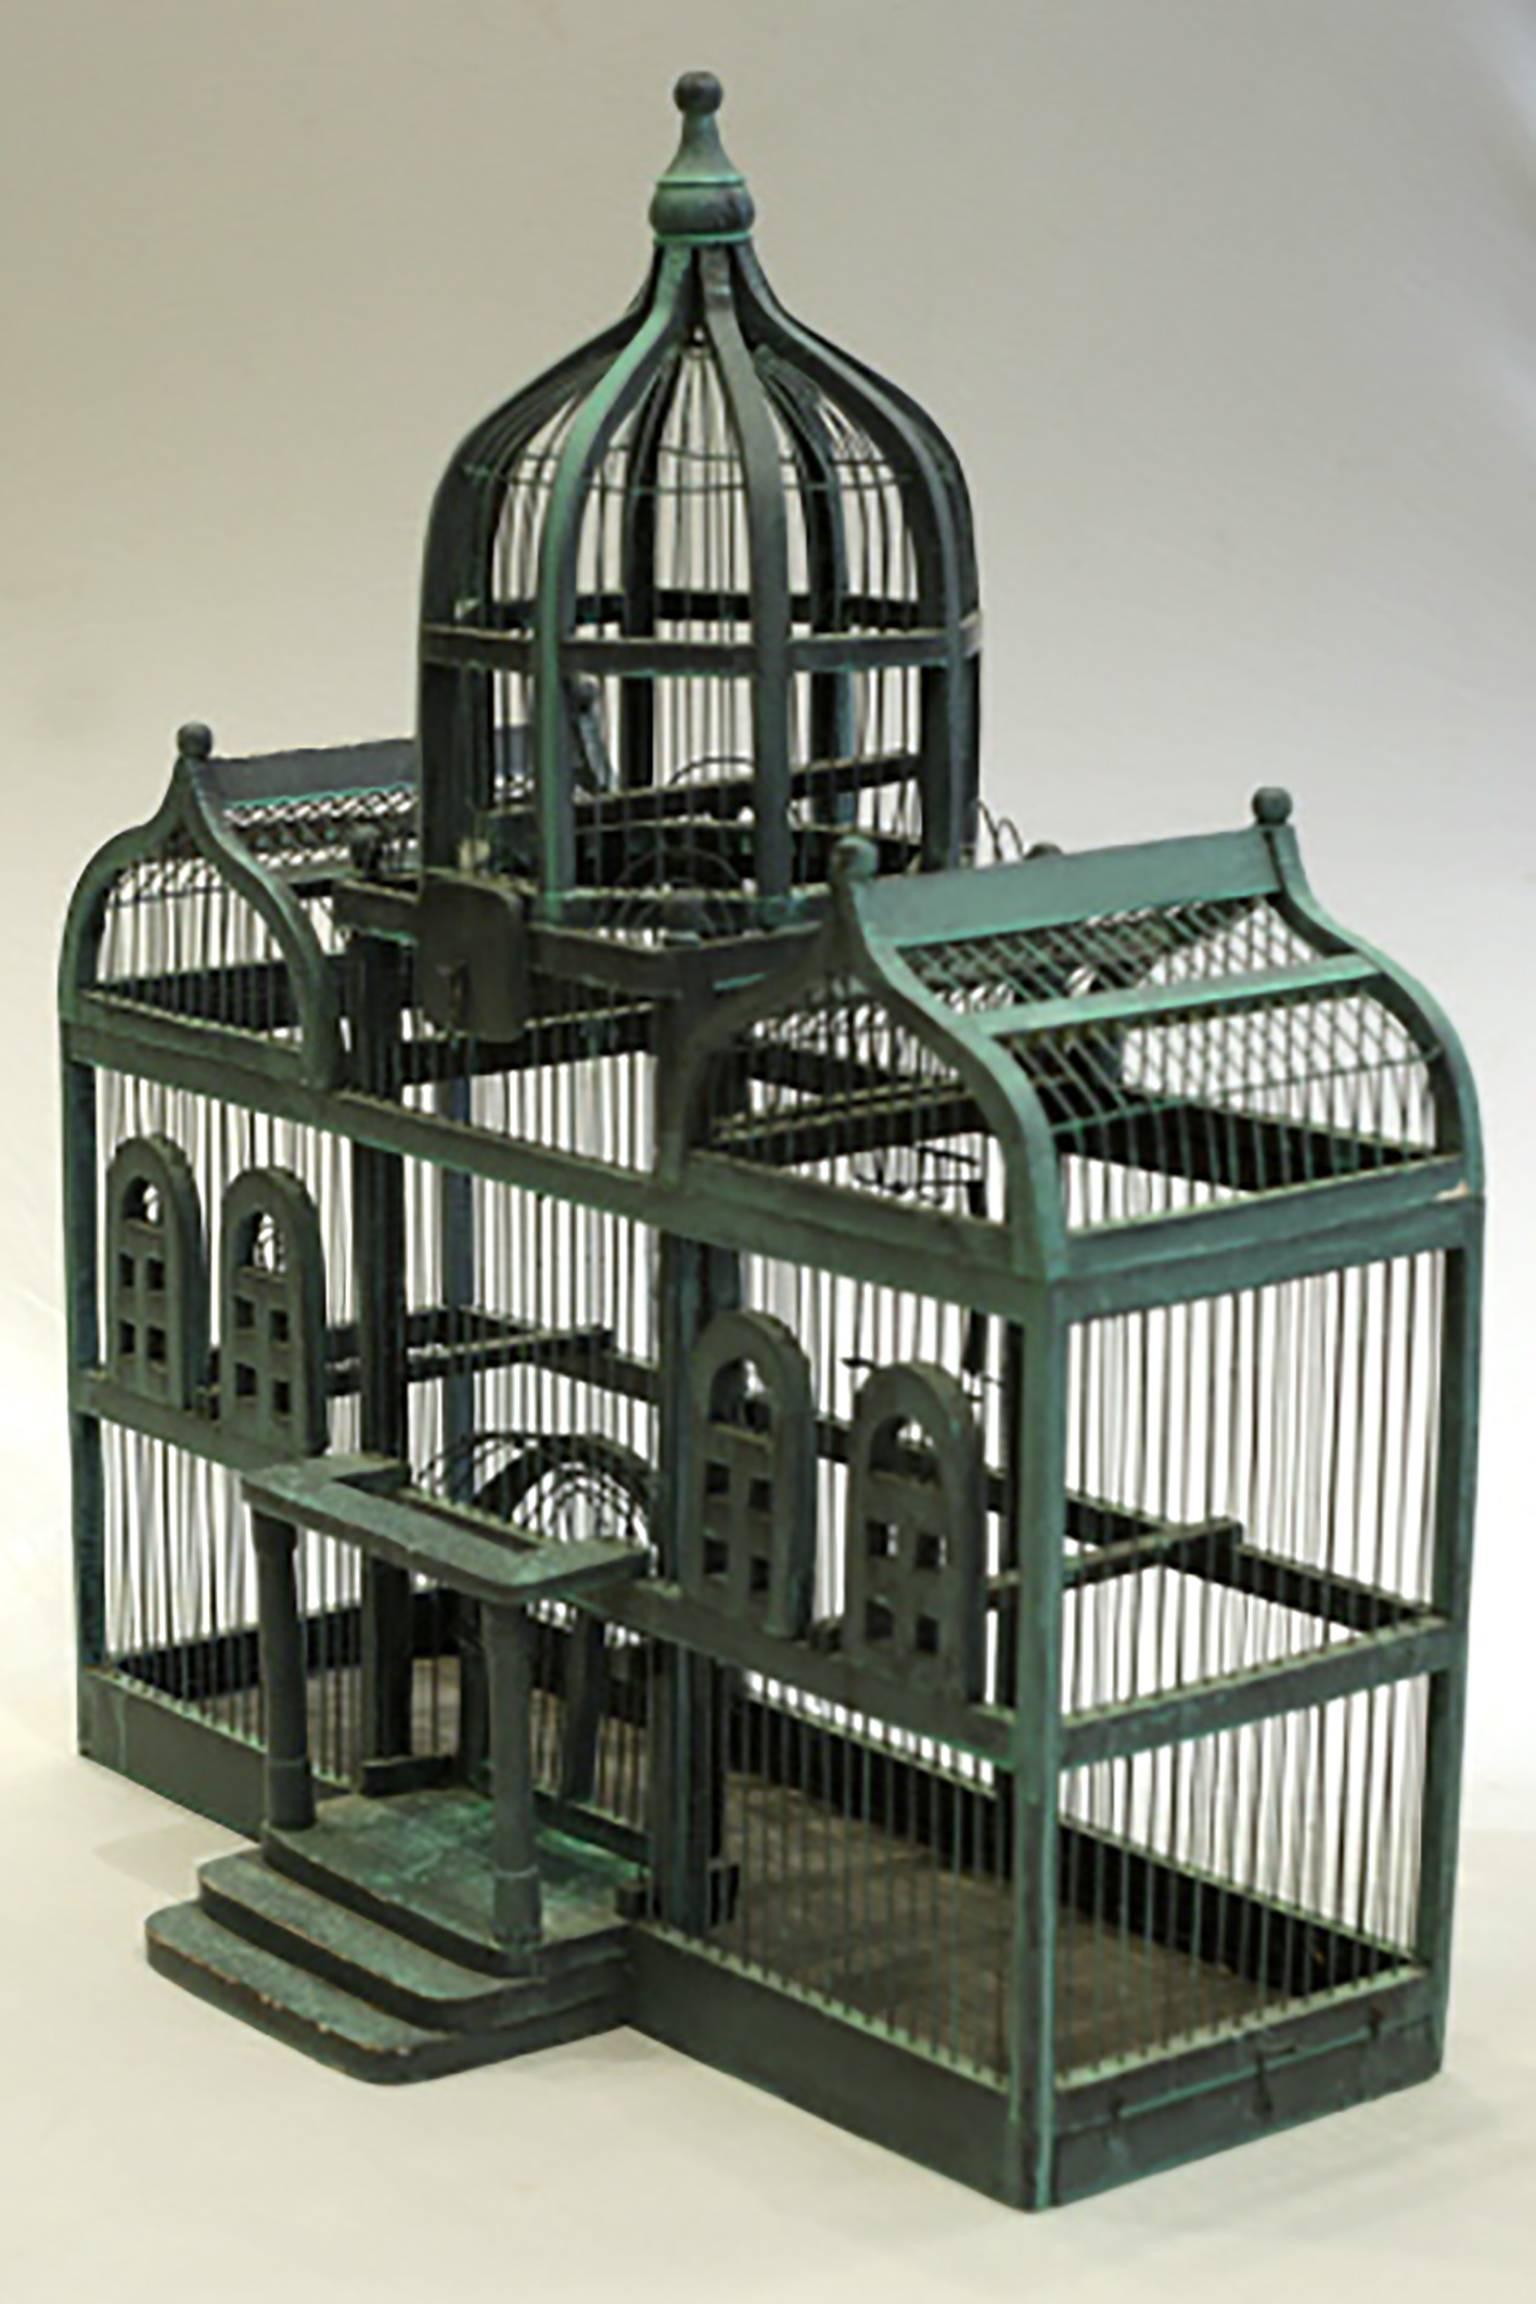 Painted wood and wire Victorian bird cage with three domes, a front porch, one door in the front and one in the back. The bottom has a metal tray and there are three perches inside for a bird to rest on. 

Measures: 31.5 H, 14 D 27.5.